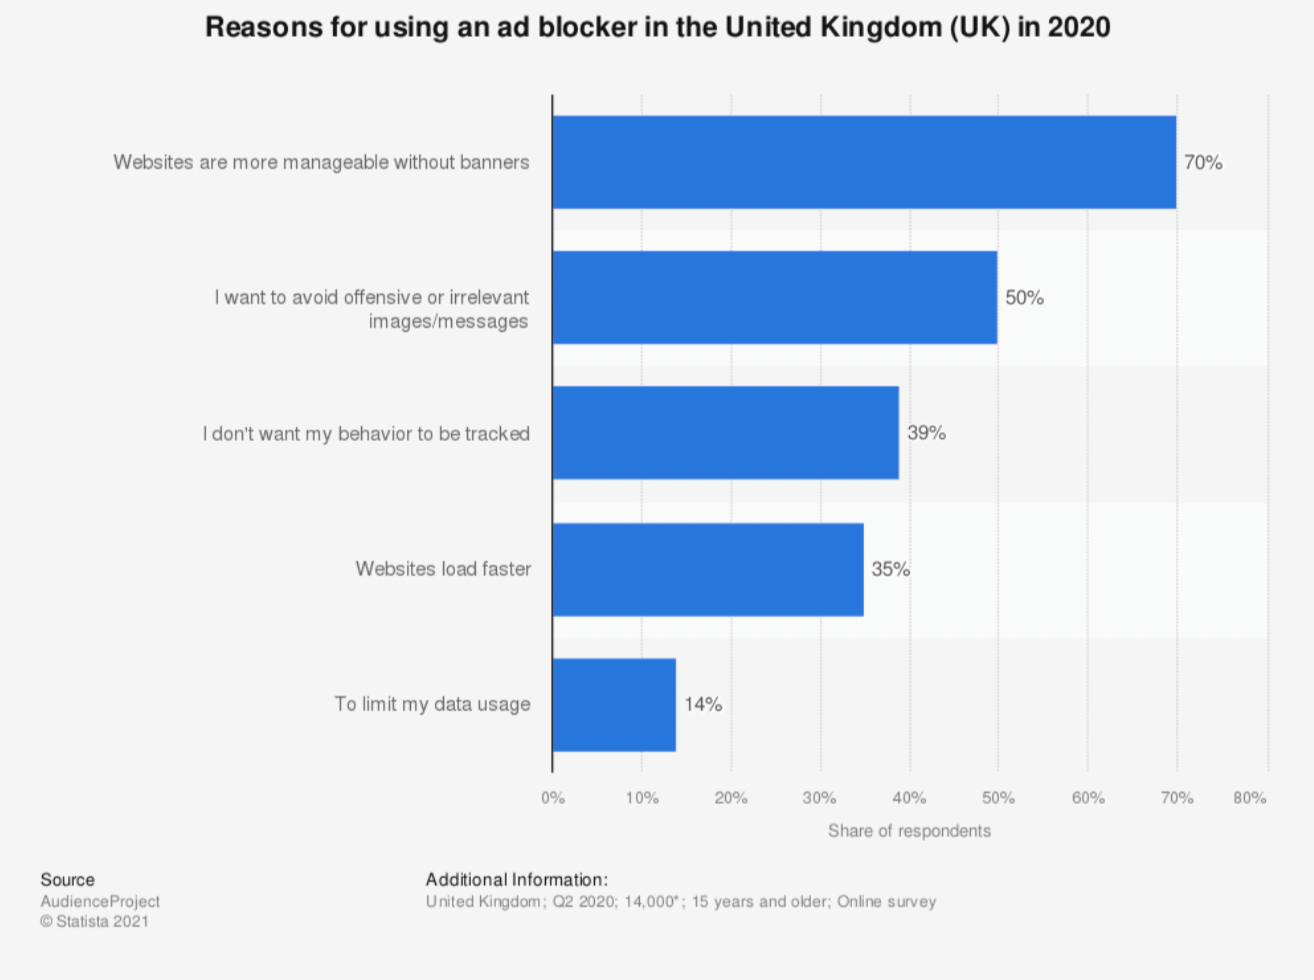 Reasons for using an ad blocker in the UK chart